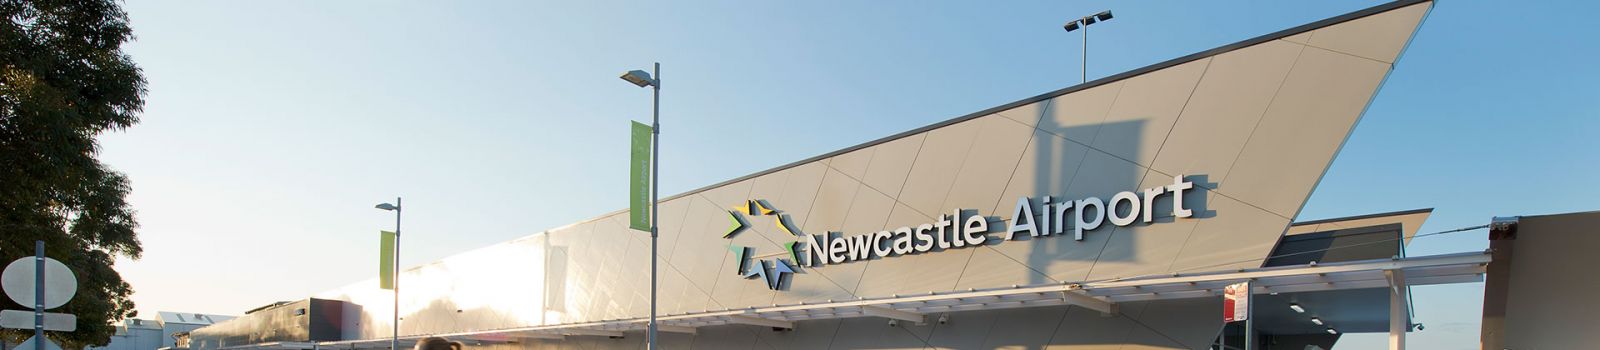 Artisits impression of Newcastle airport banner image